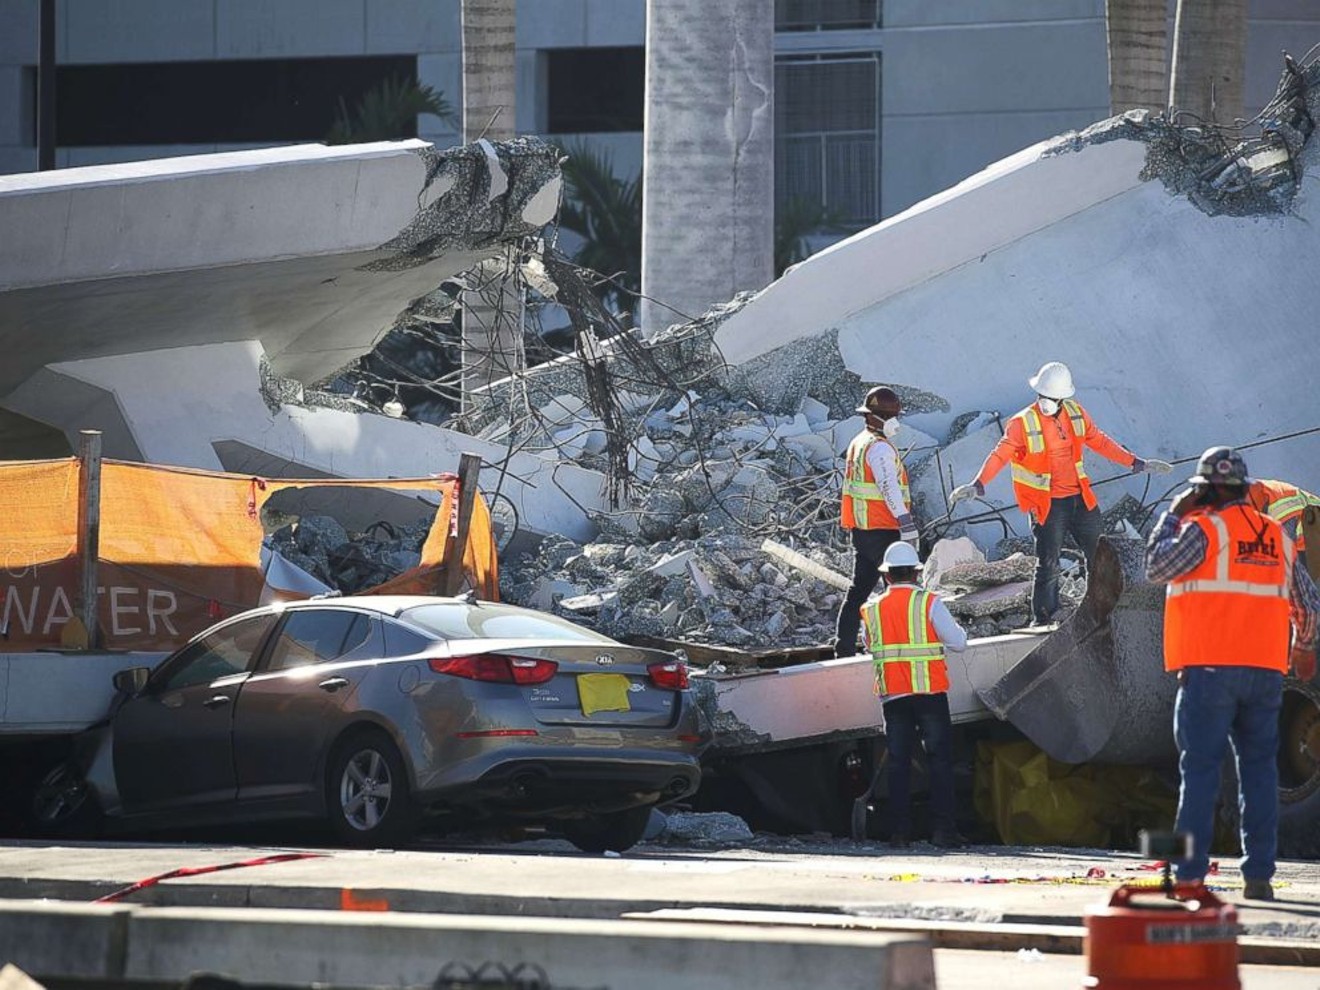 Munilla Construction Management oversaw the FIU bridge construction project that ended in a deadly collapse on March 15, 2018.